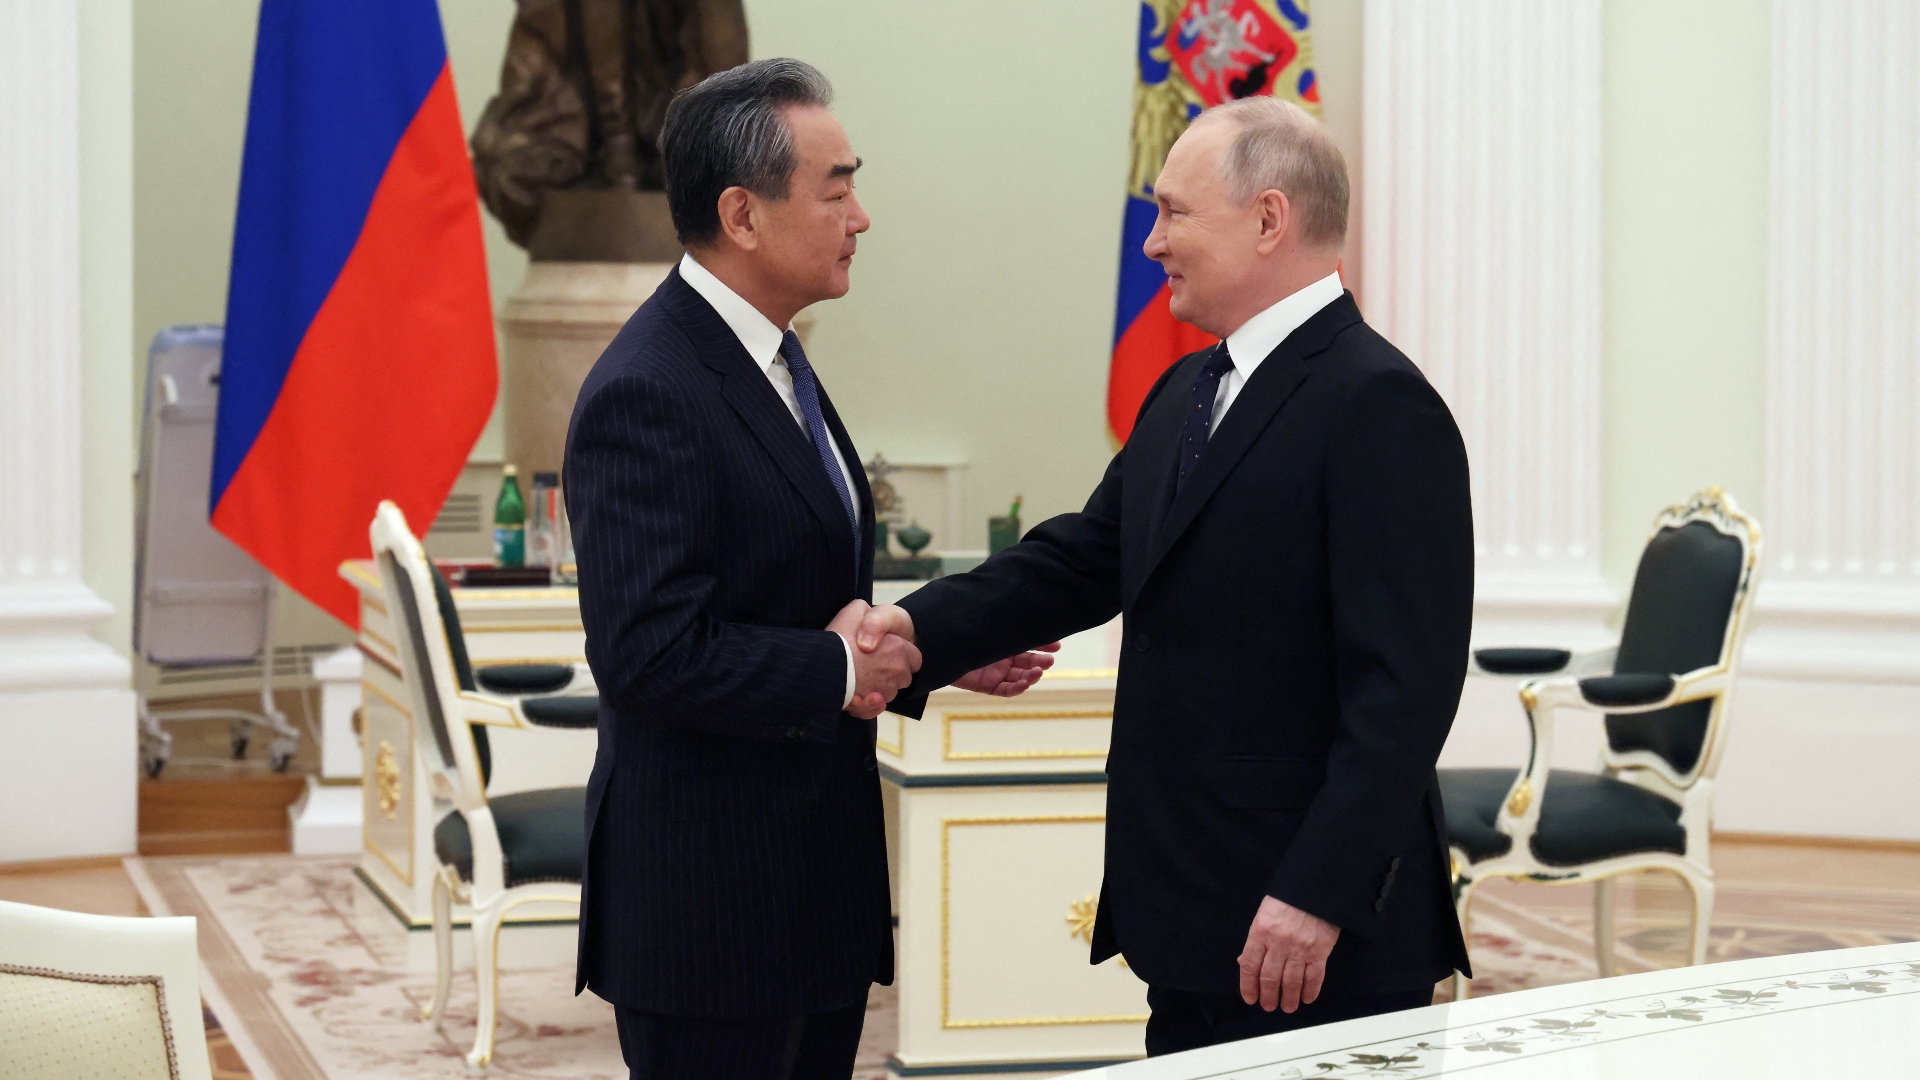 Ukraine conflict - day 364: China-Russia relations 'won't be influenced by third parties,'